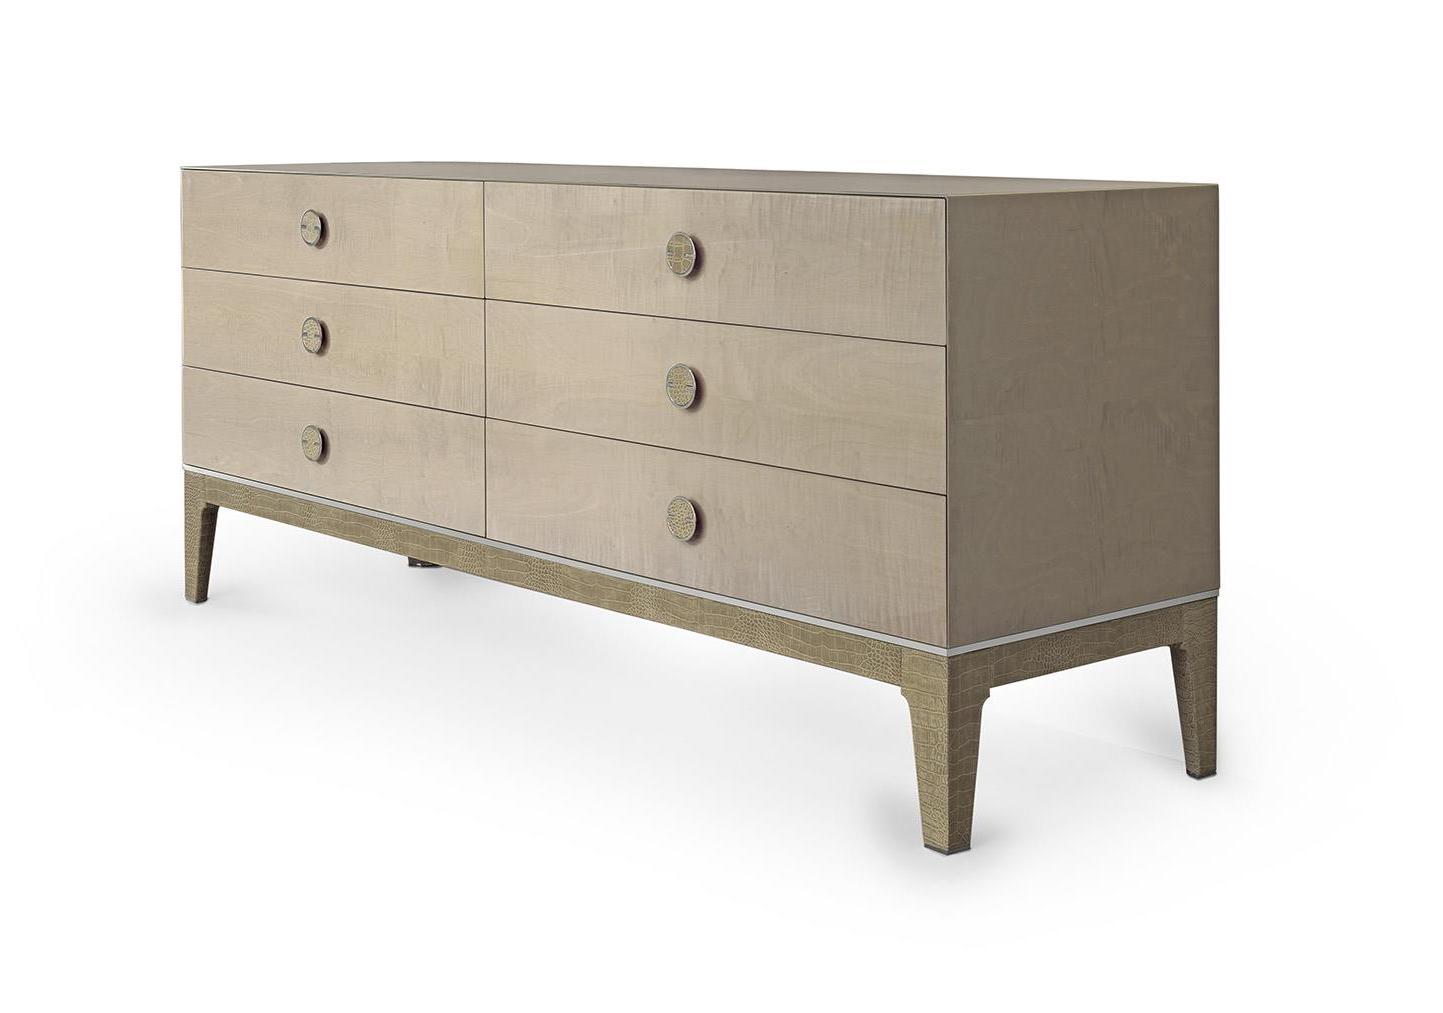 Mplace Dresser with Leather-Upholstered Legs